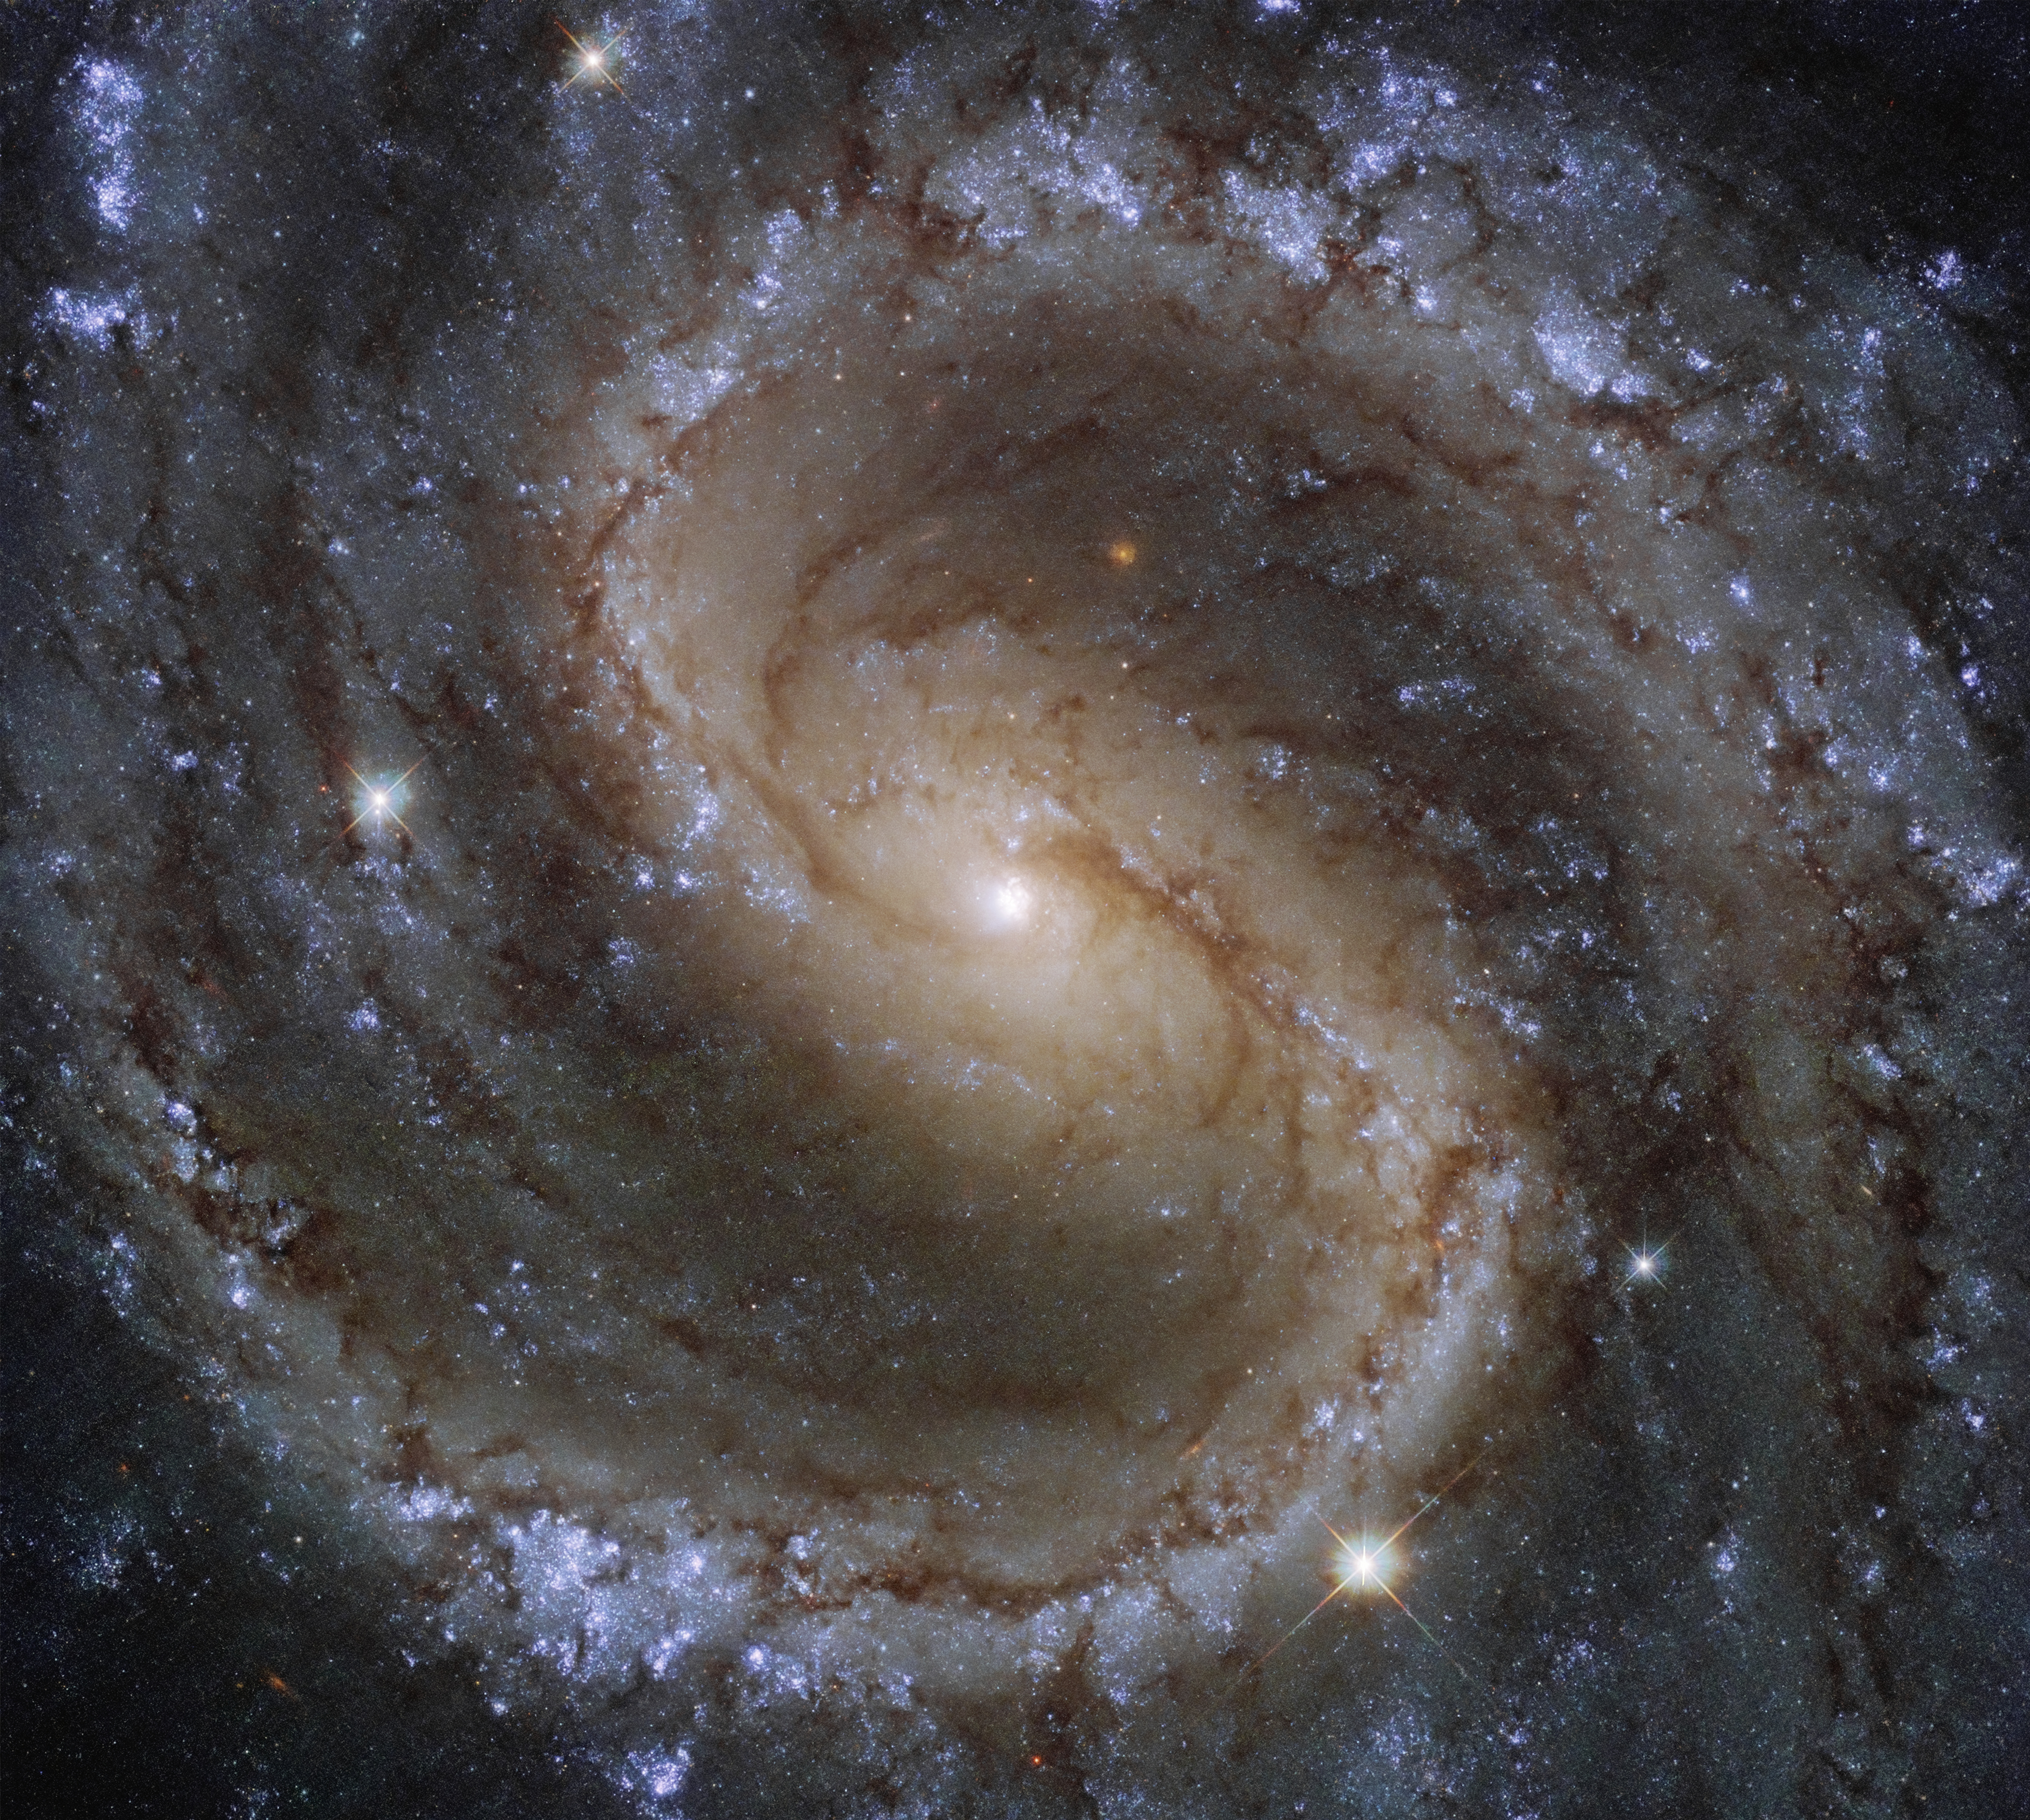 Arms swirl of freshly smoked up blue stars round a cold-ass lil central region of olda yellow stars up in dis galaxy image.